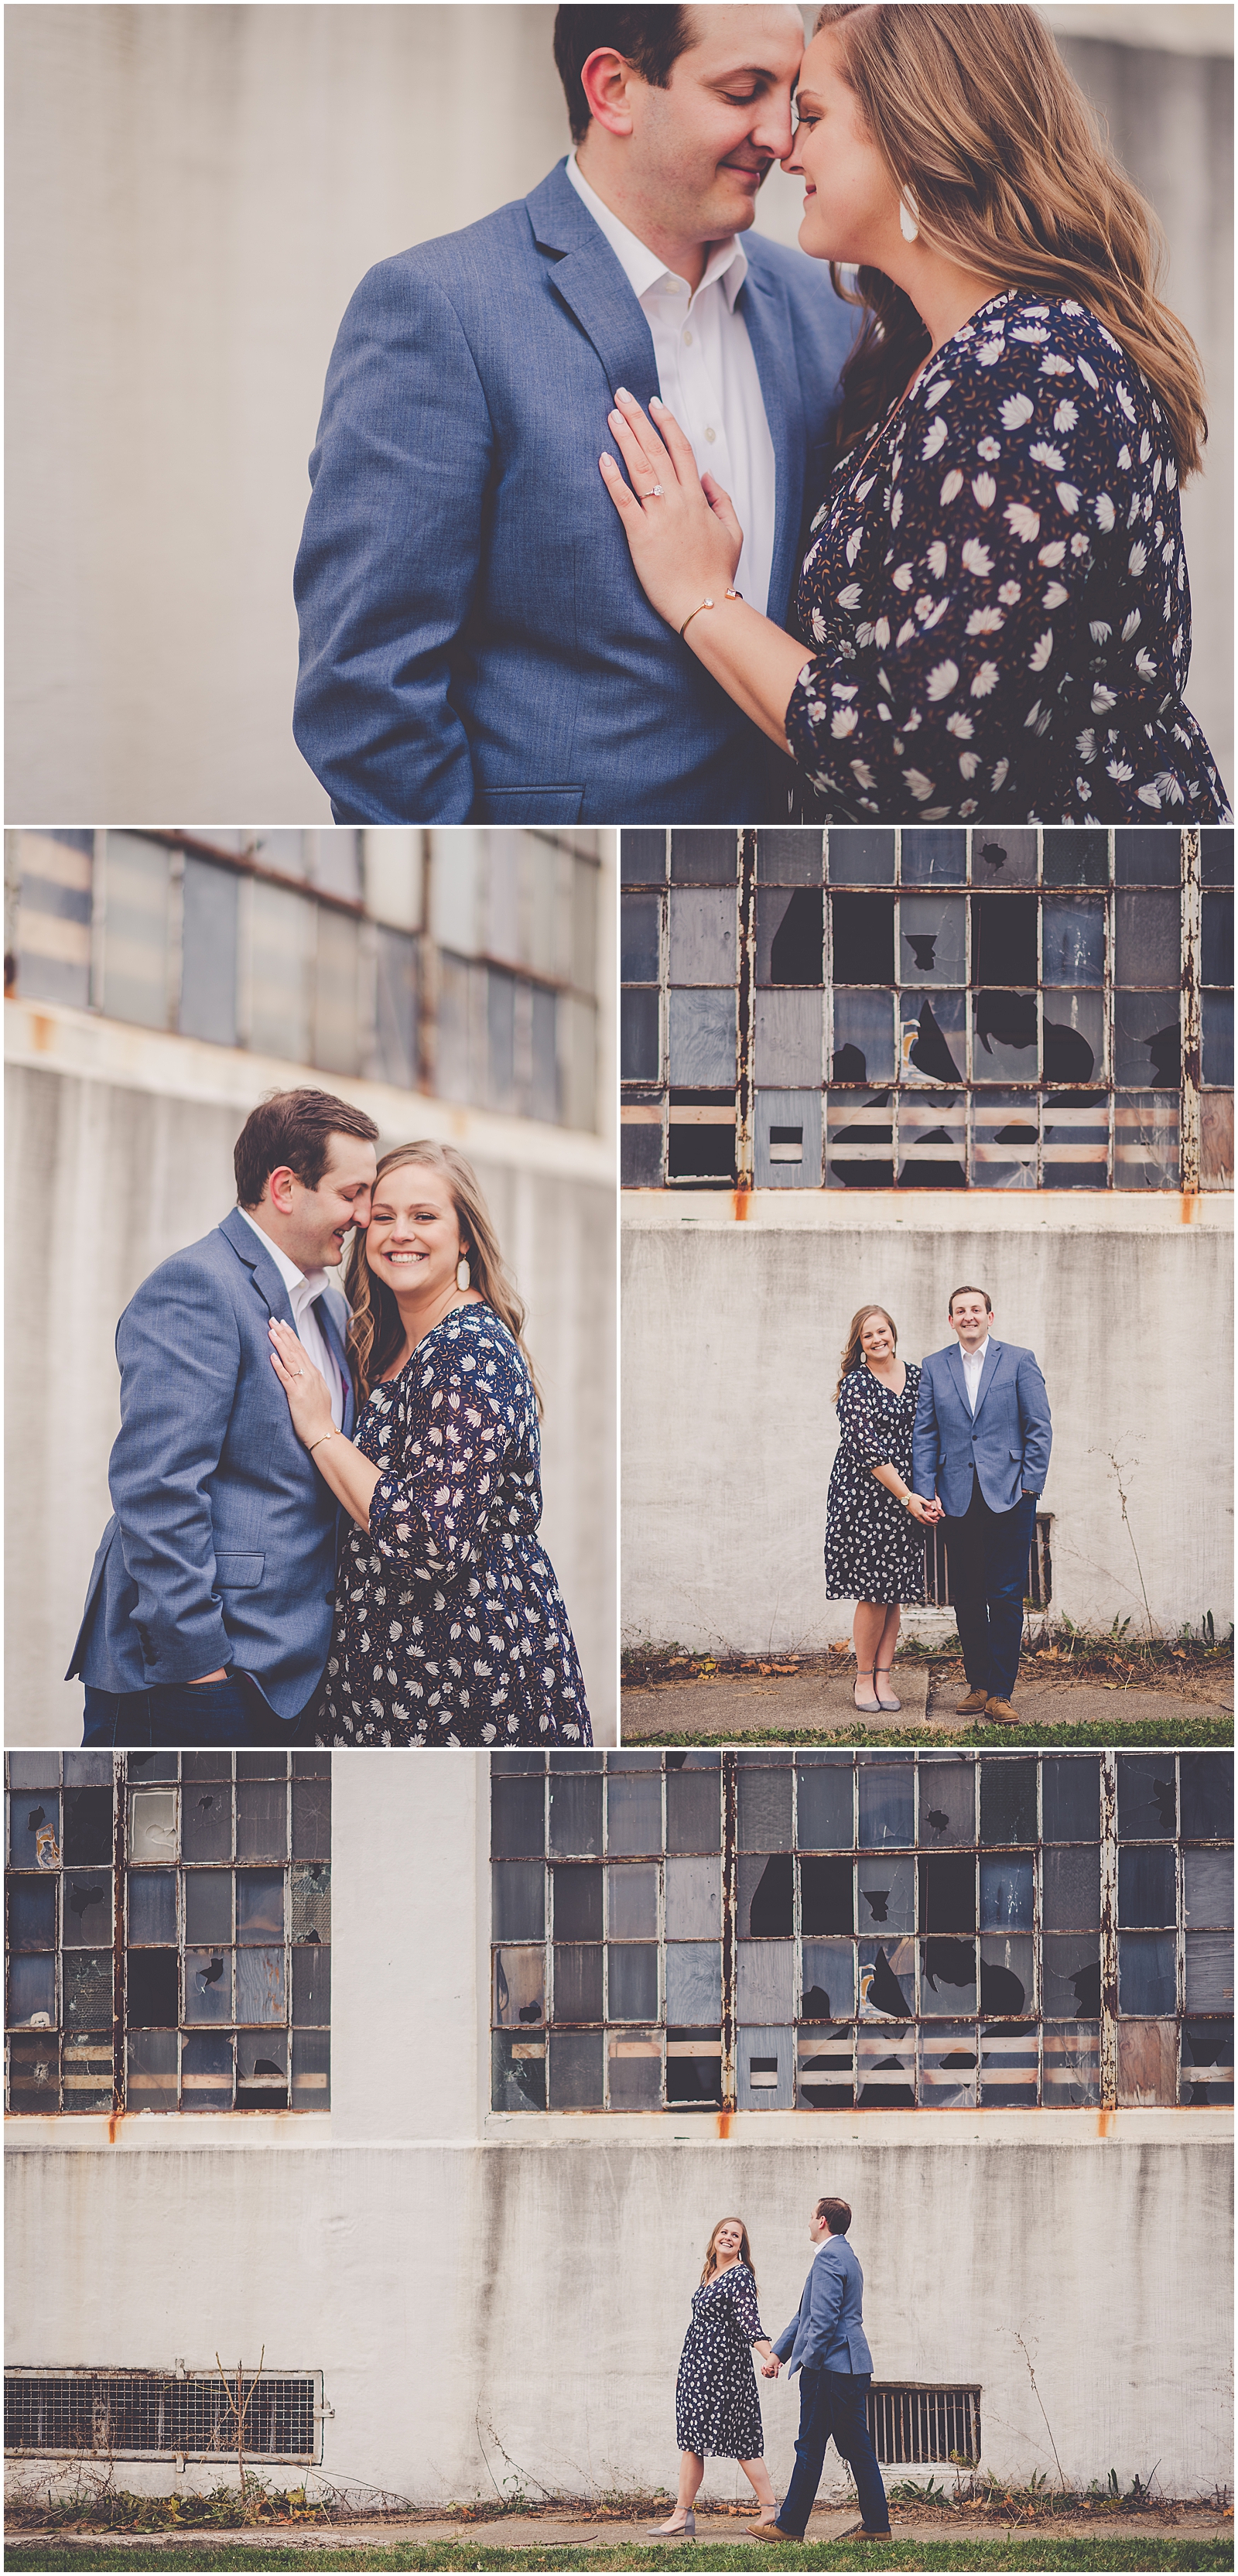 Meredith and Ryan's downtown Kankakee photos and Kankakee Country Club engagement session in Kankakee with Chicagoland photographer Kara Evans Photographer.